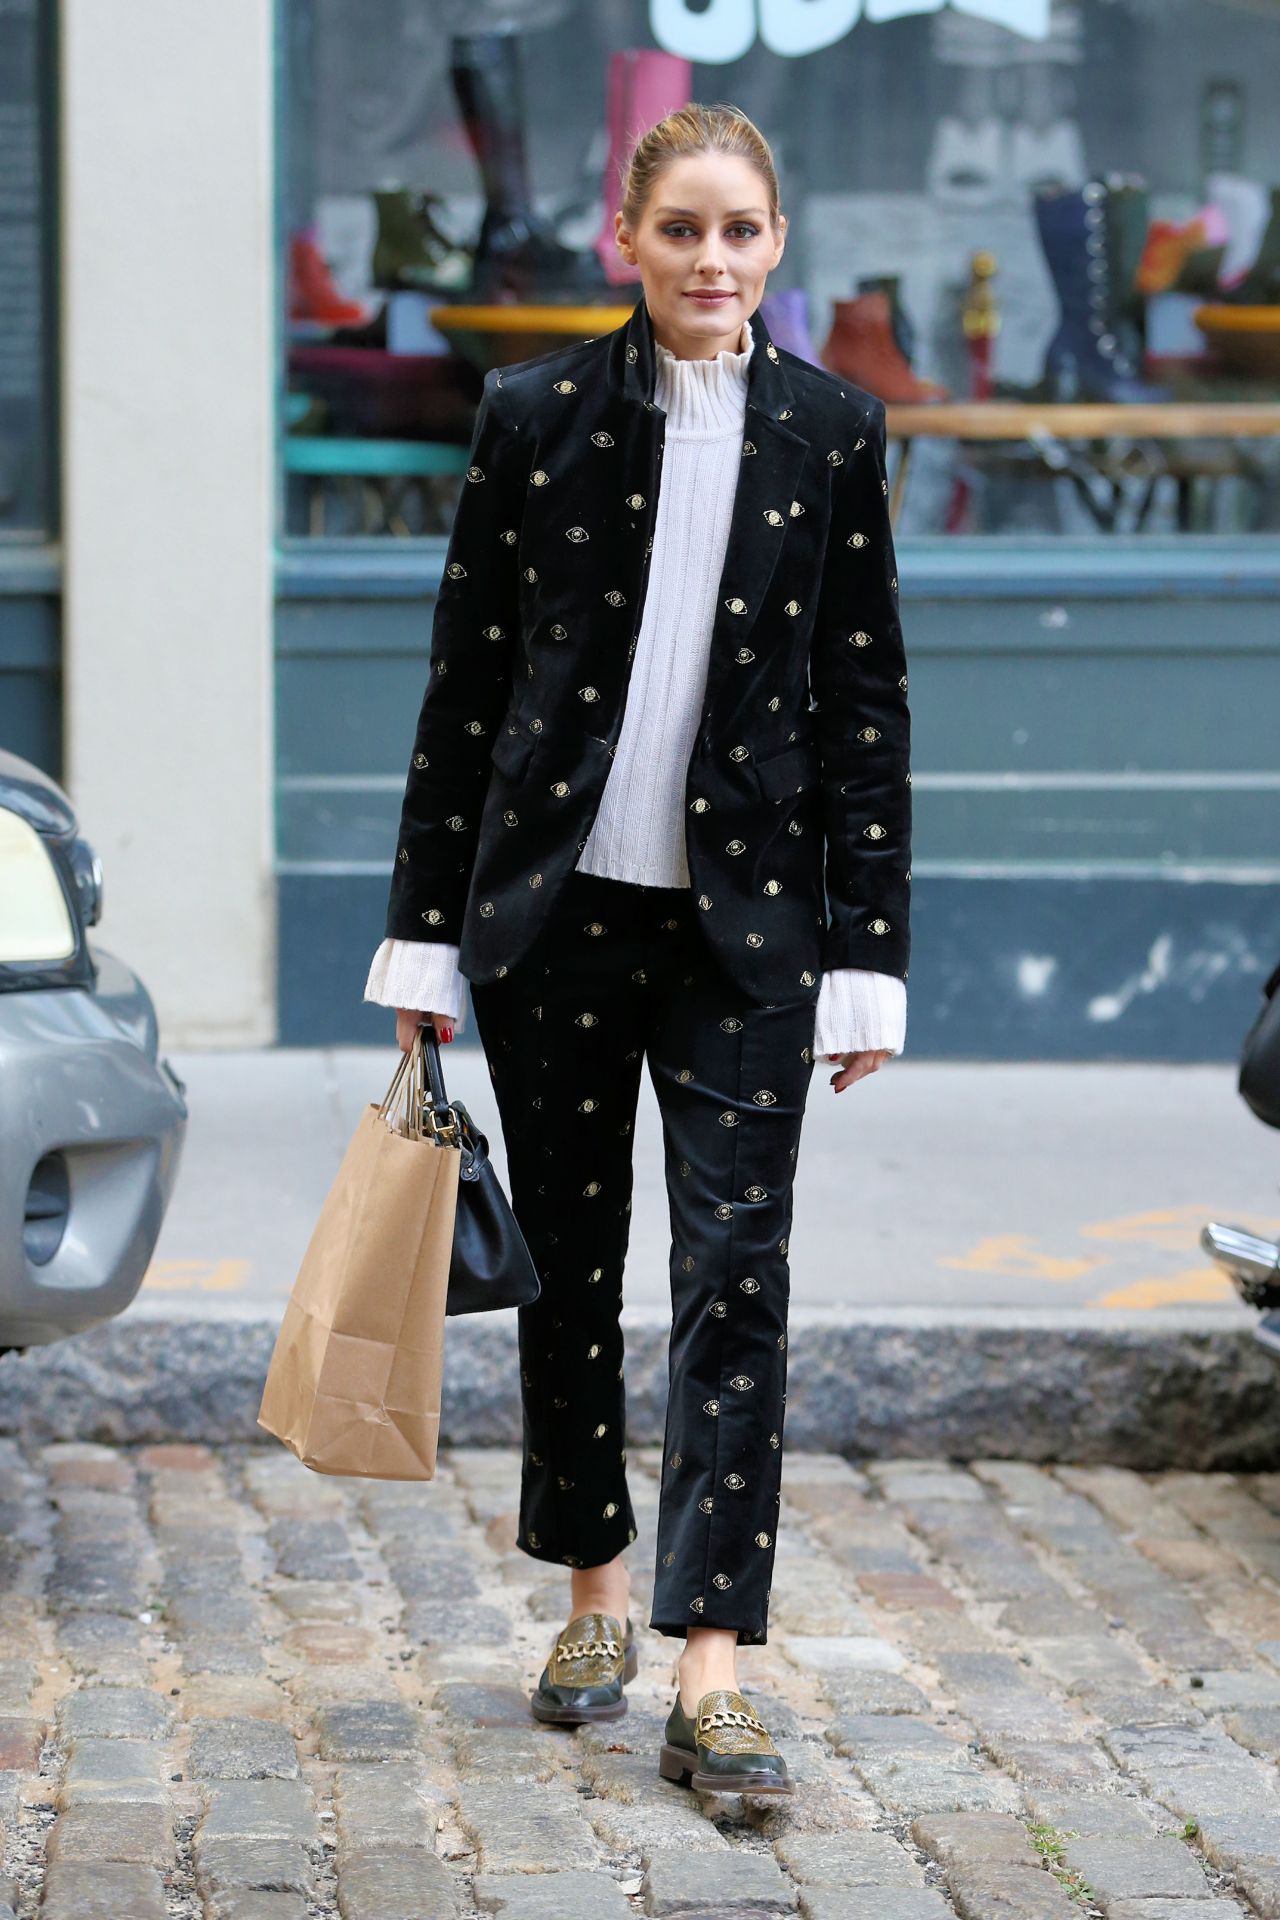 Olivia Palermo In A Crushed Velvet Suit And White Sweater Shopping In